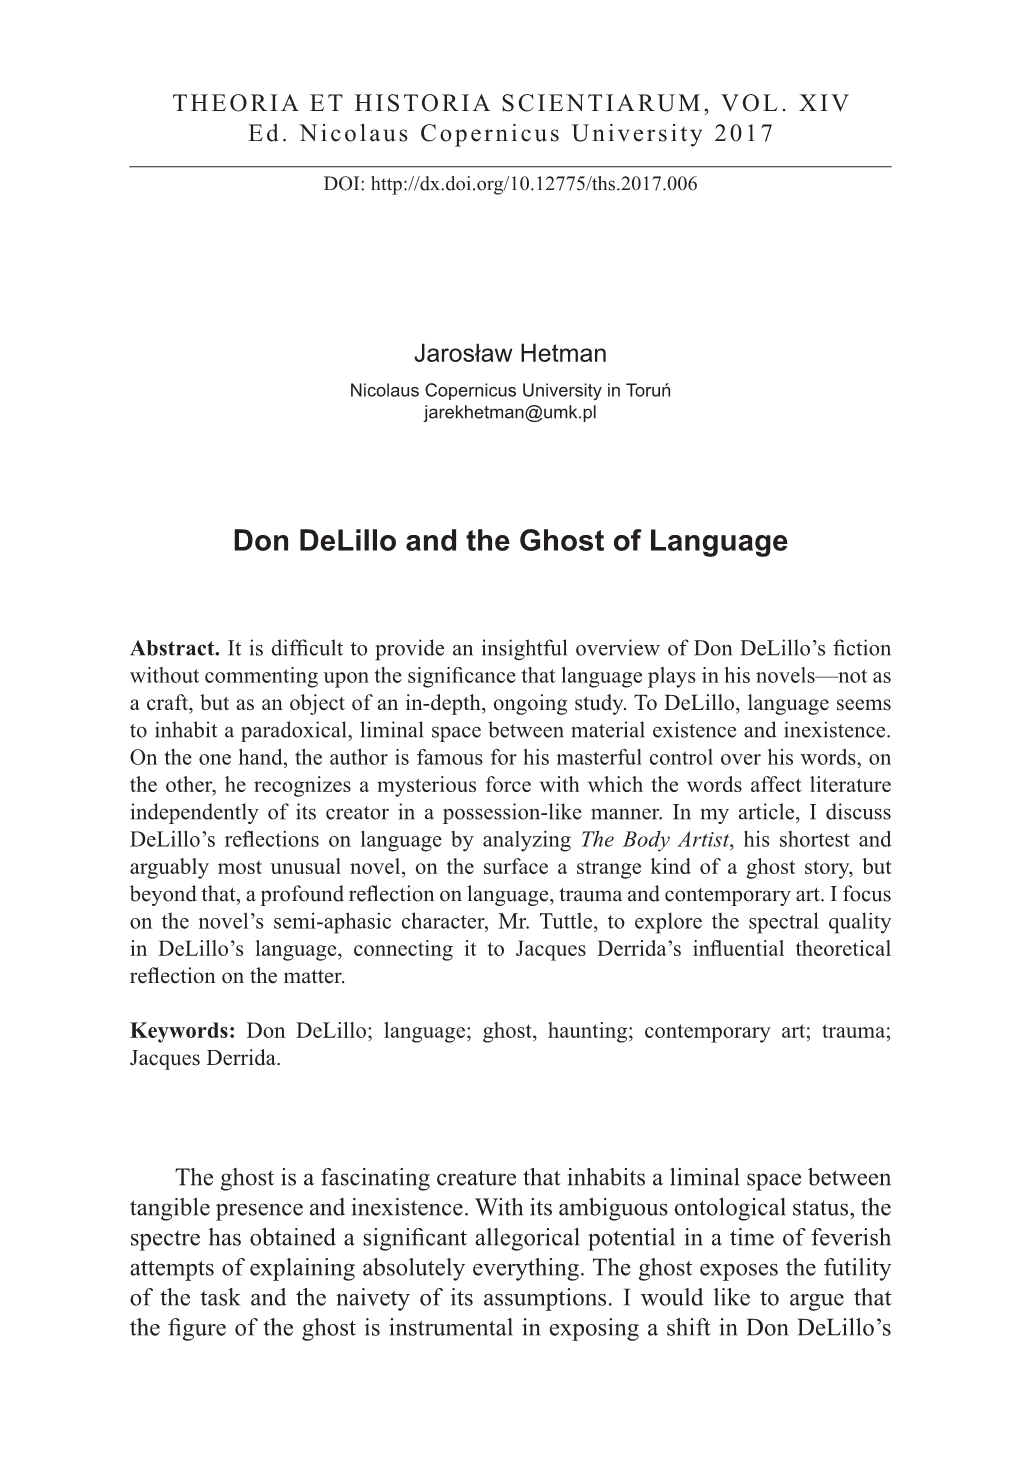 Don Delillo and the Ghost of Language